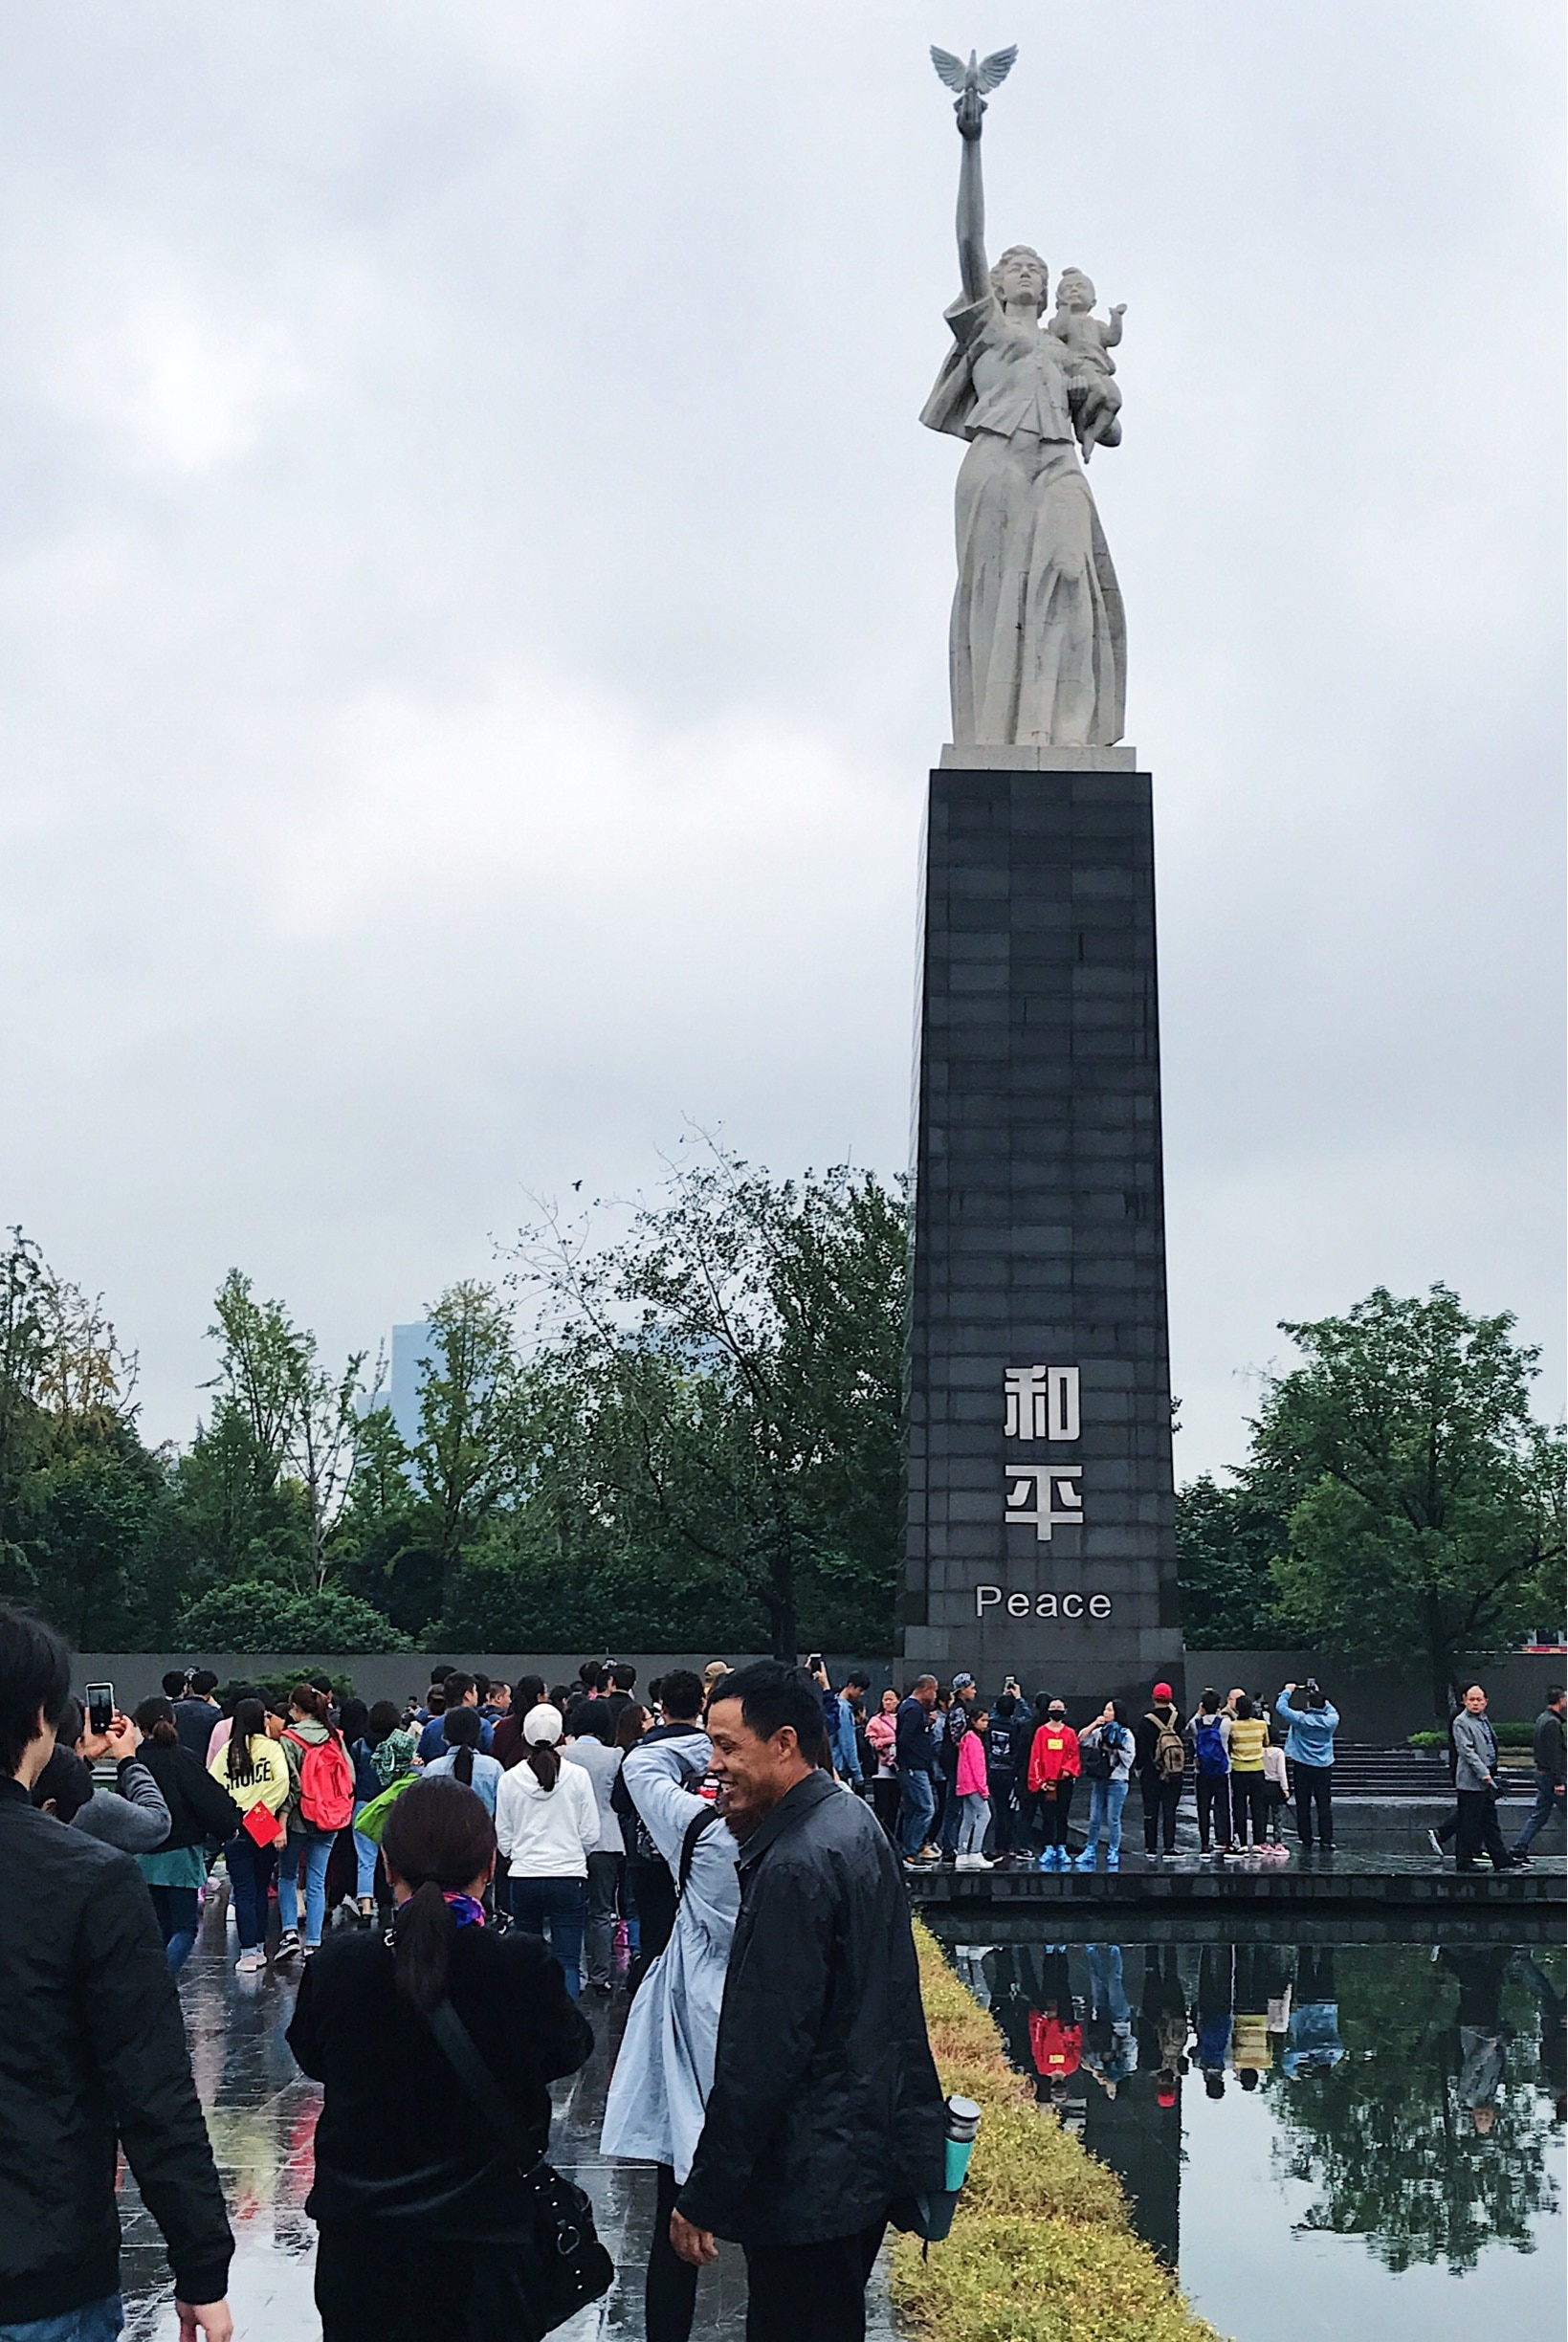 Statue representing peace at the end of the Nanjing Massacre Memorial.